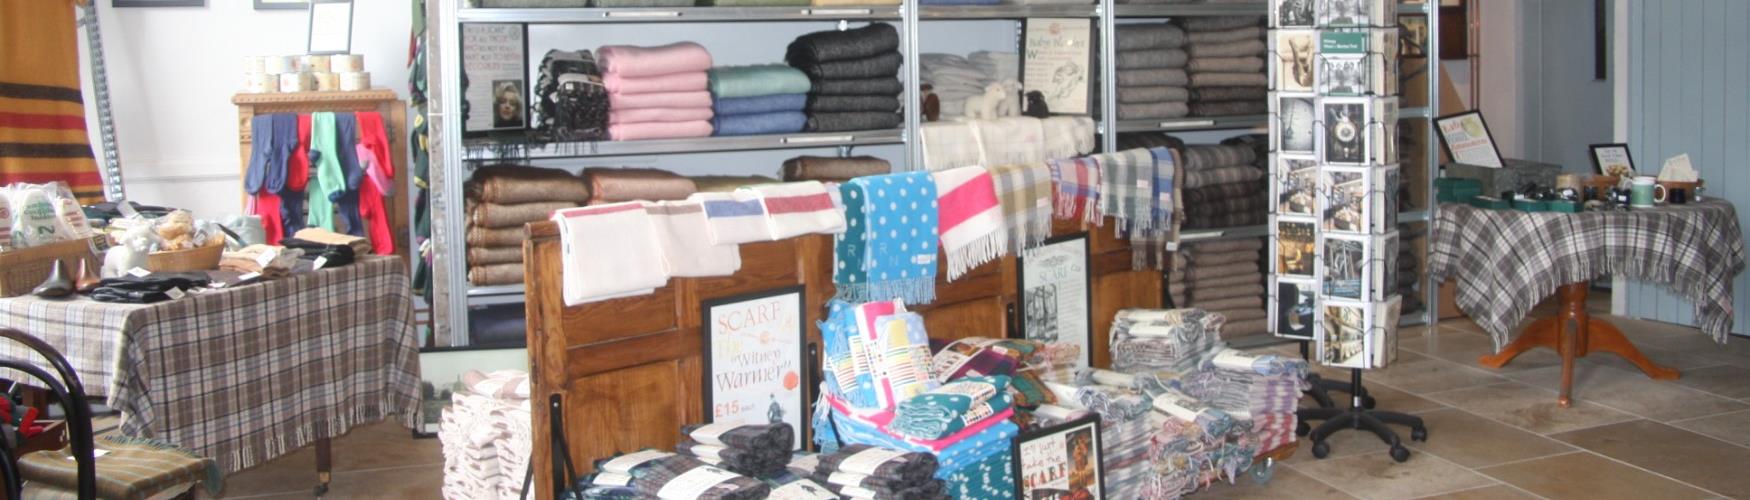 Scarves and blankets on sale at Witney Blanket Hall